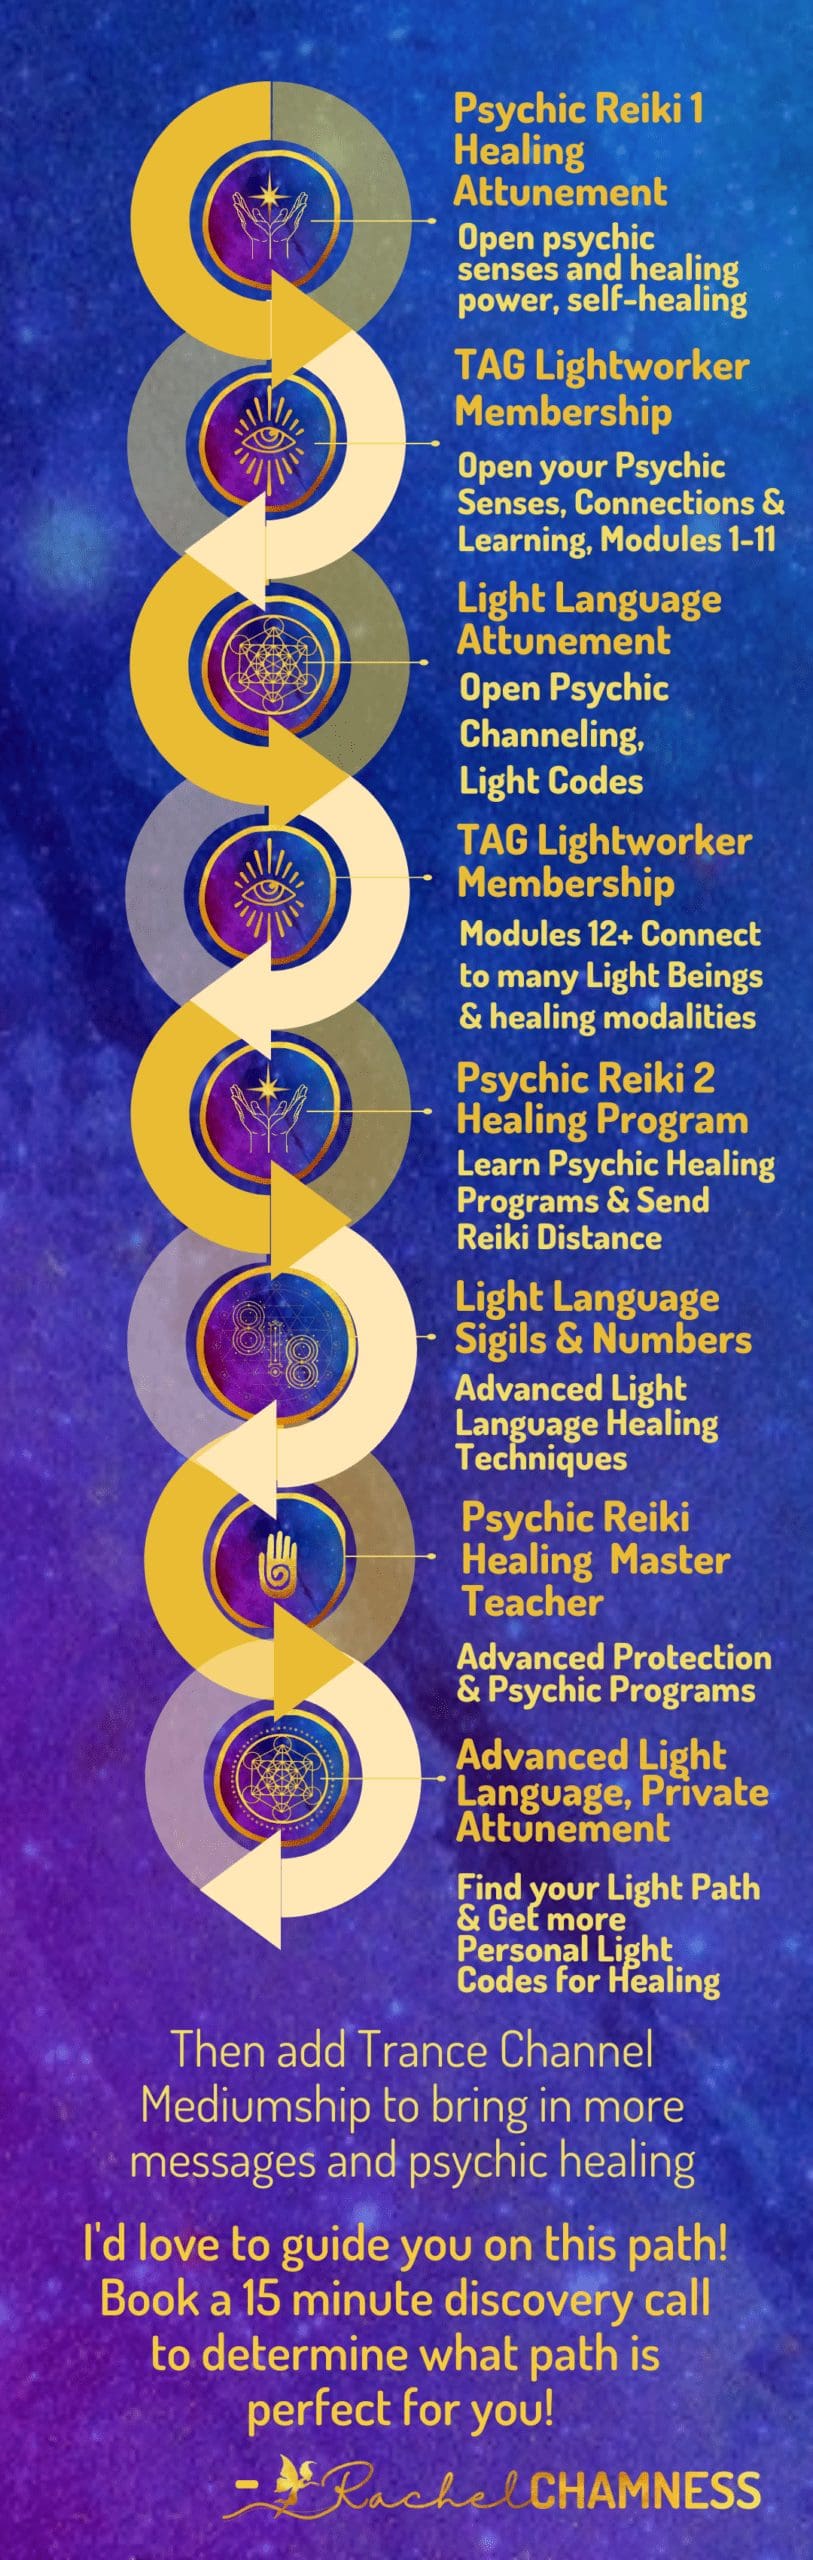 How to become a psychic healer image